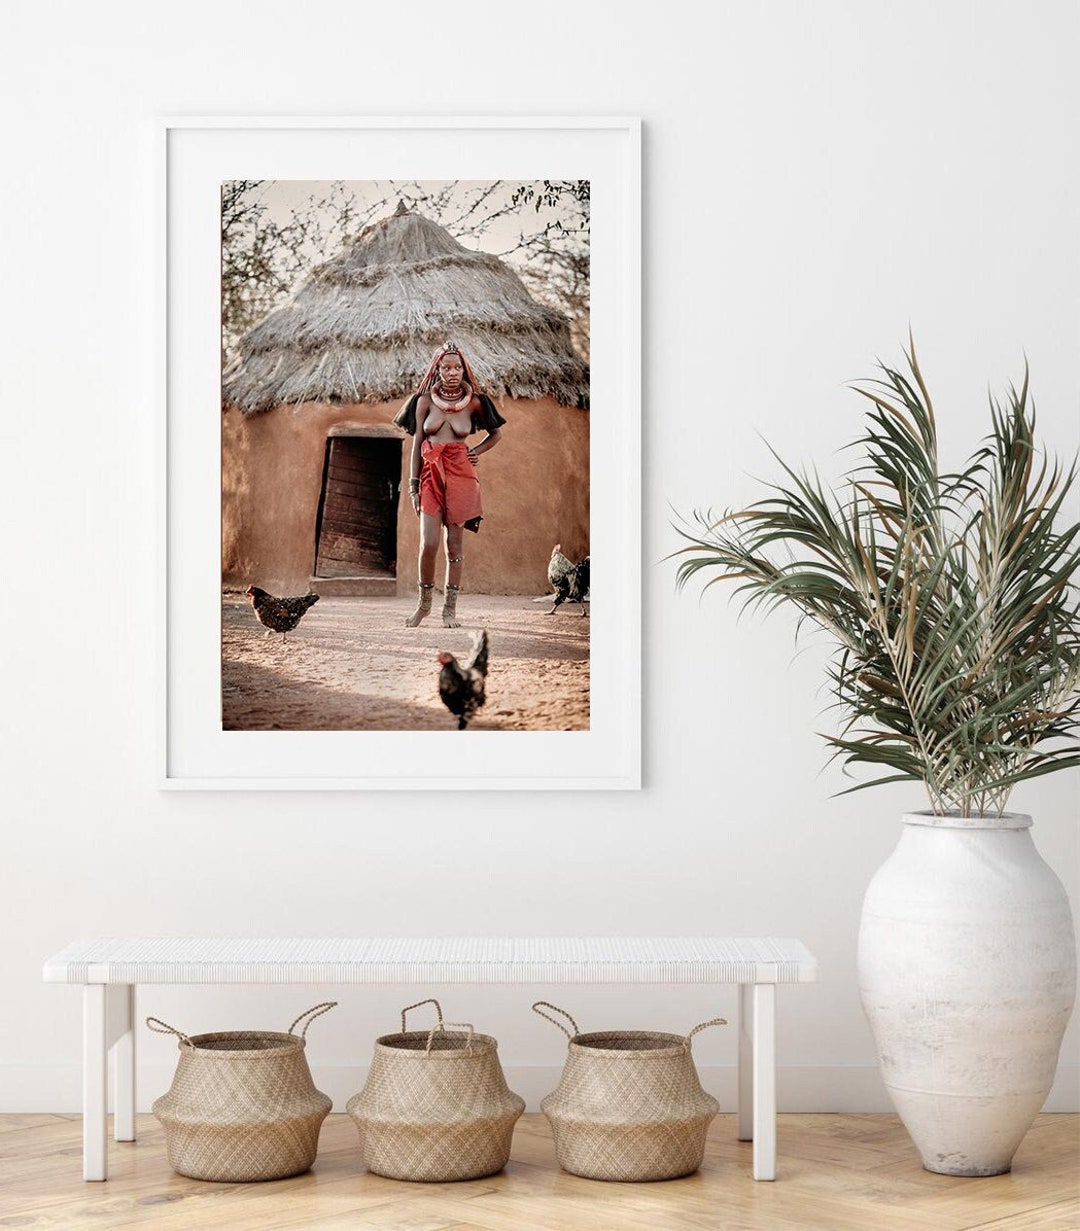 African Culture Wall Art, Tribal Woman Print, Naked Woman Poster, Nude Photography, Himba People Wall Decor, Instant Download, African Gift - Etsy 日本